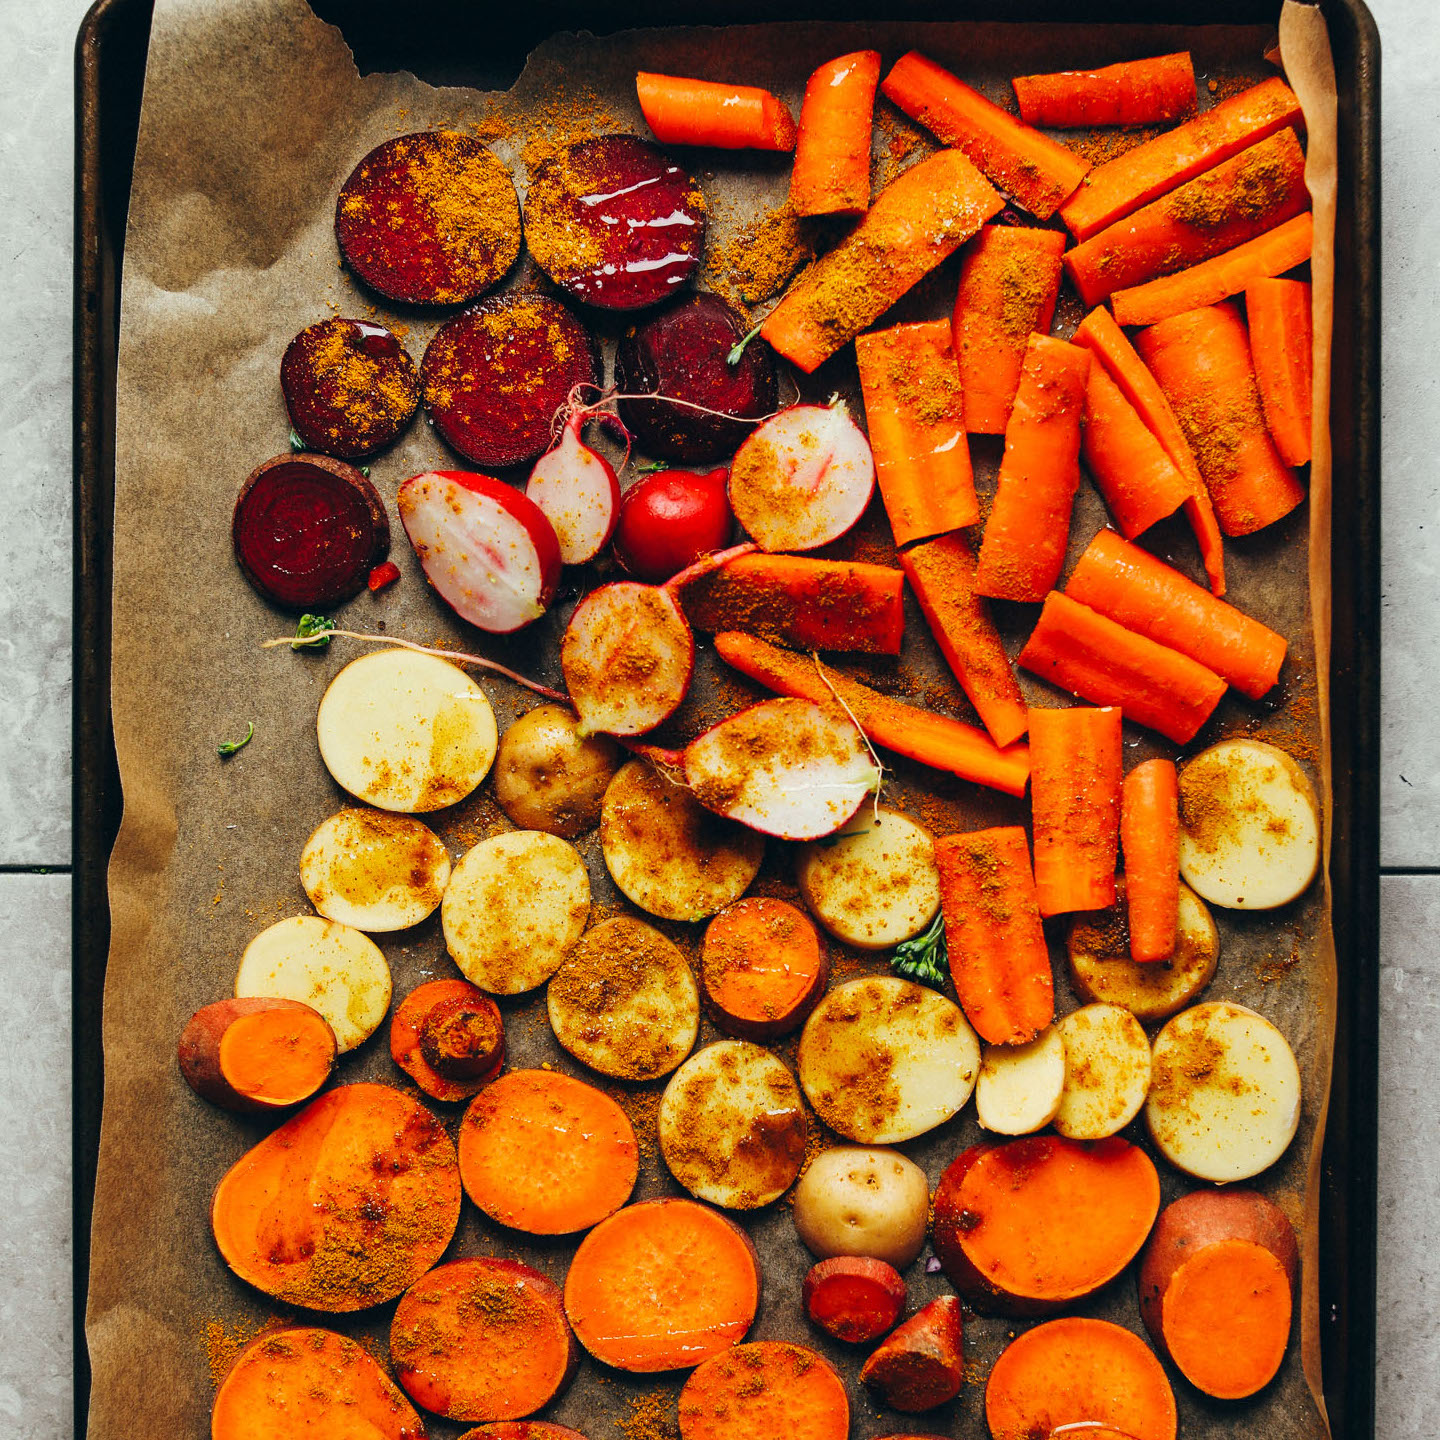 Shredded carrots, beets, radishes and sweet potatoes on a roasting tray